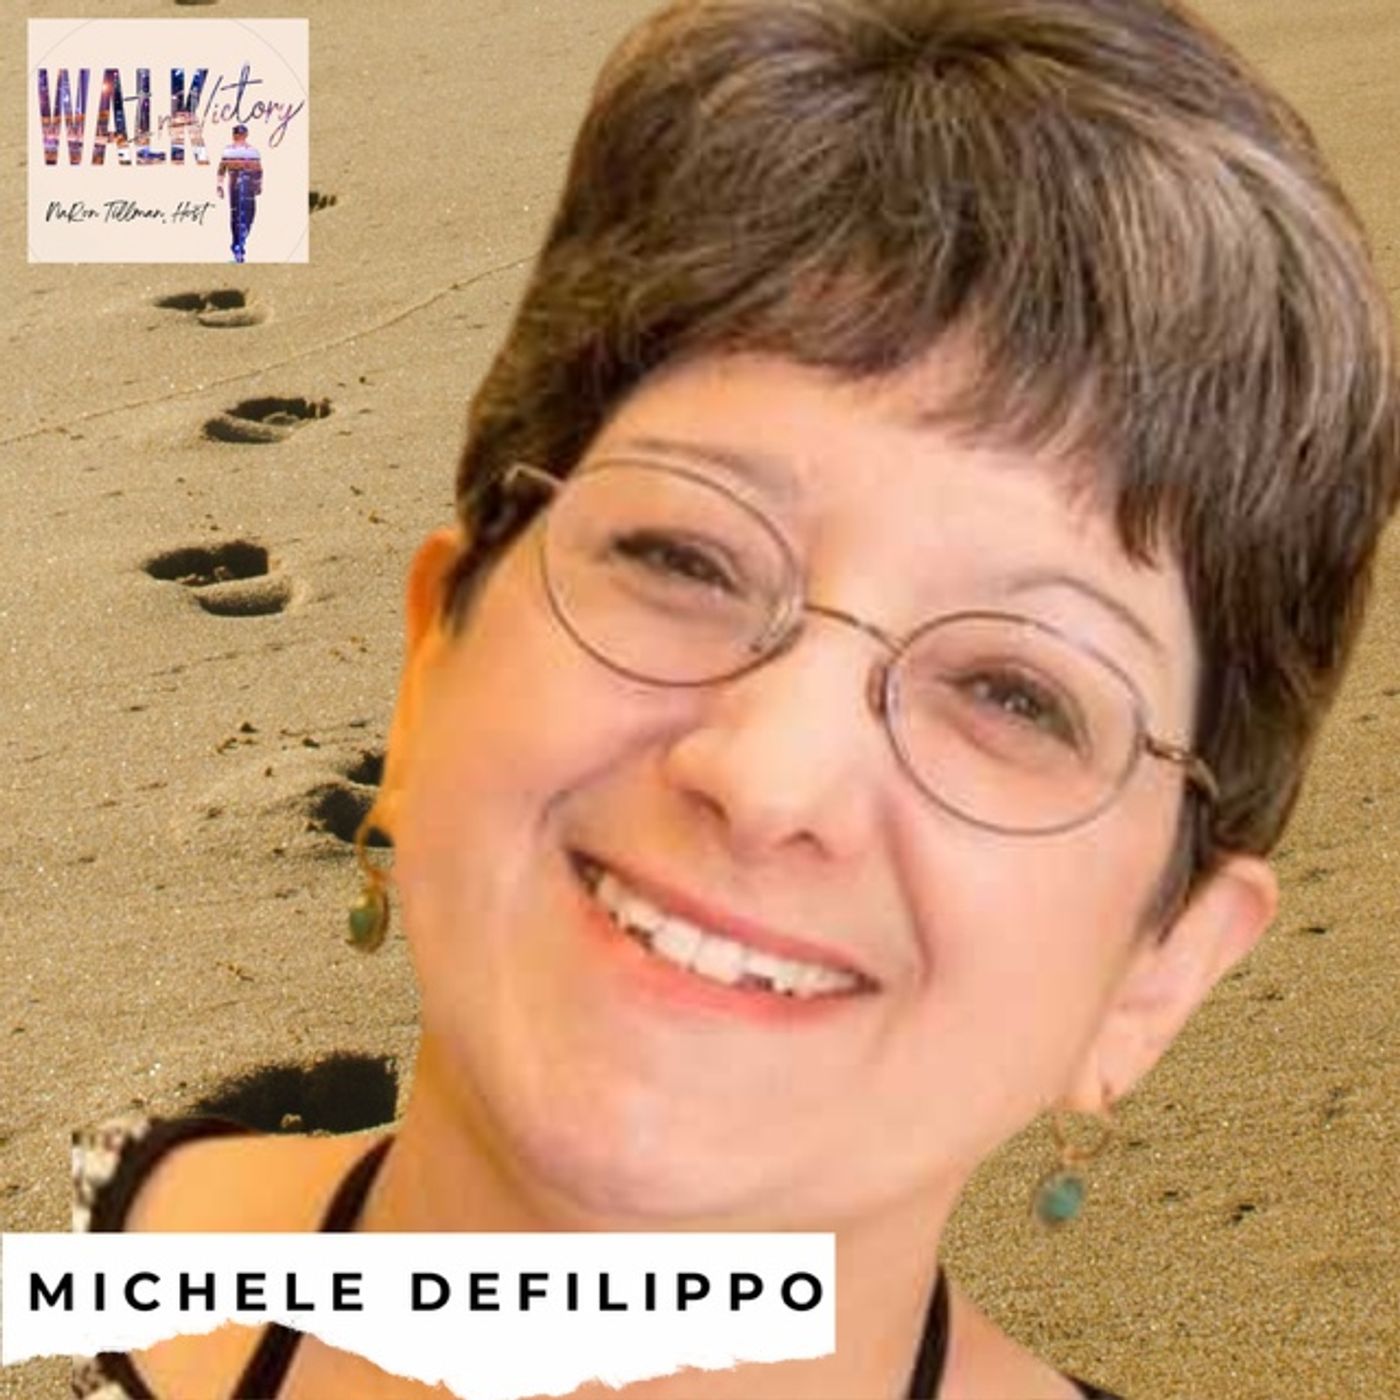 Masterclass in Storytelling: Michele DeFilippo on the Art and Business of Books